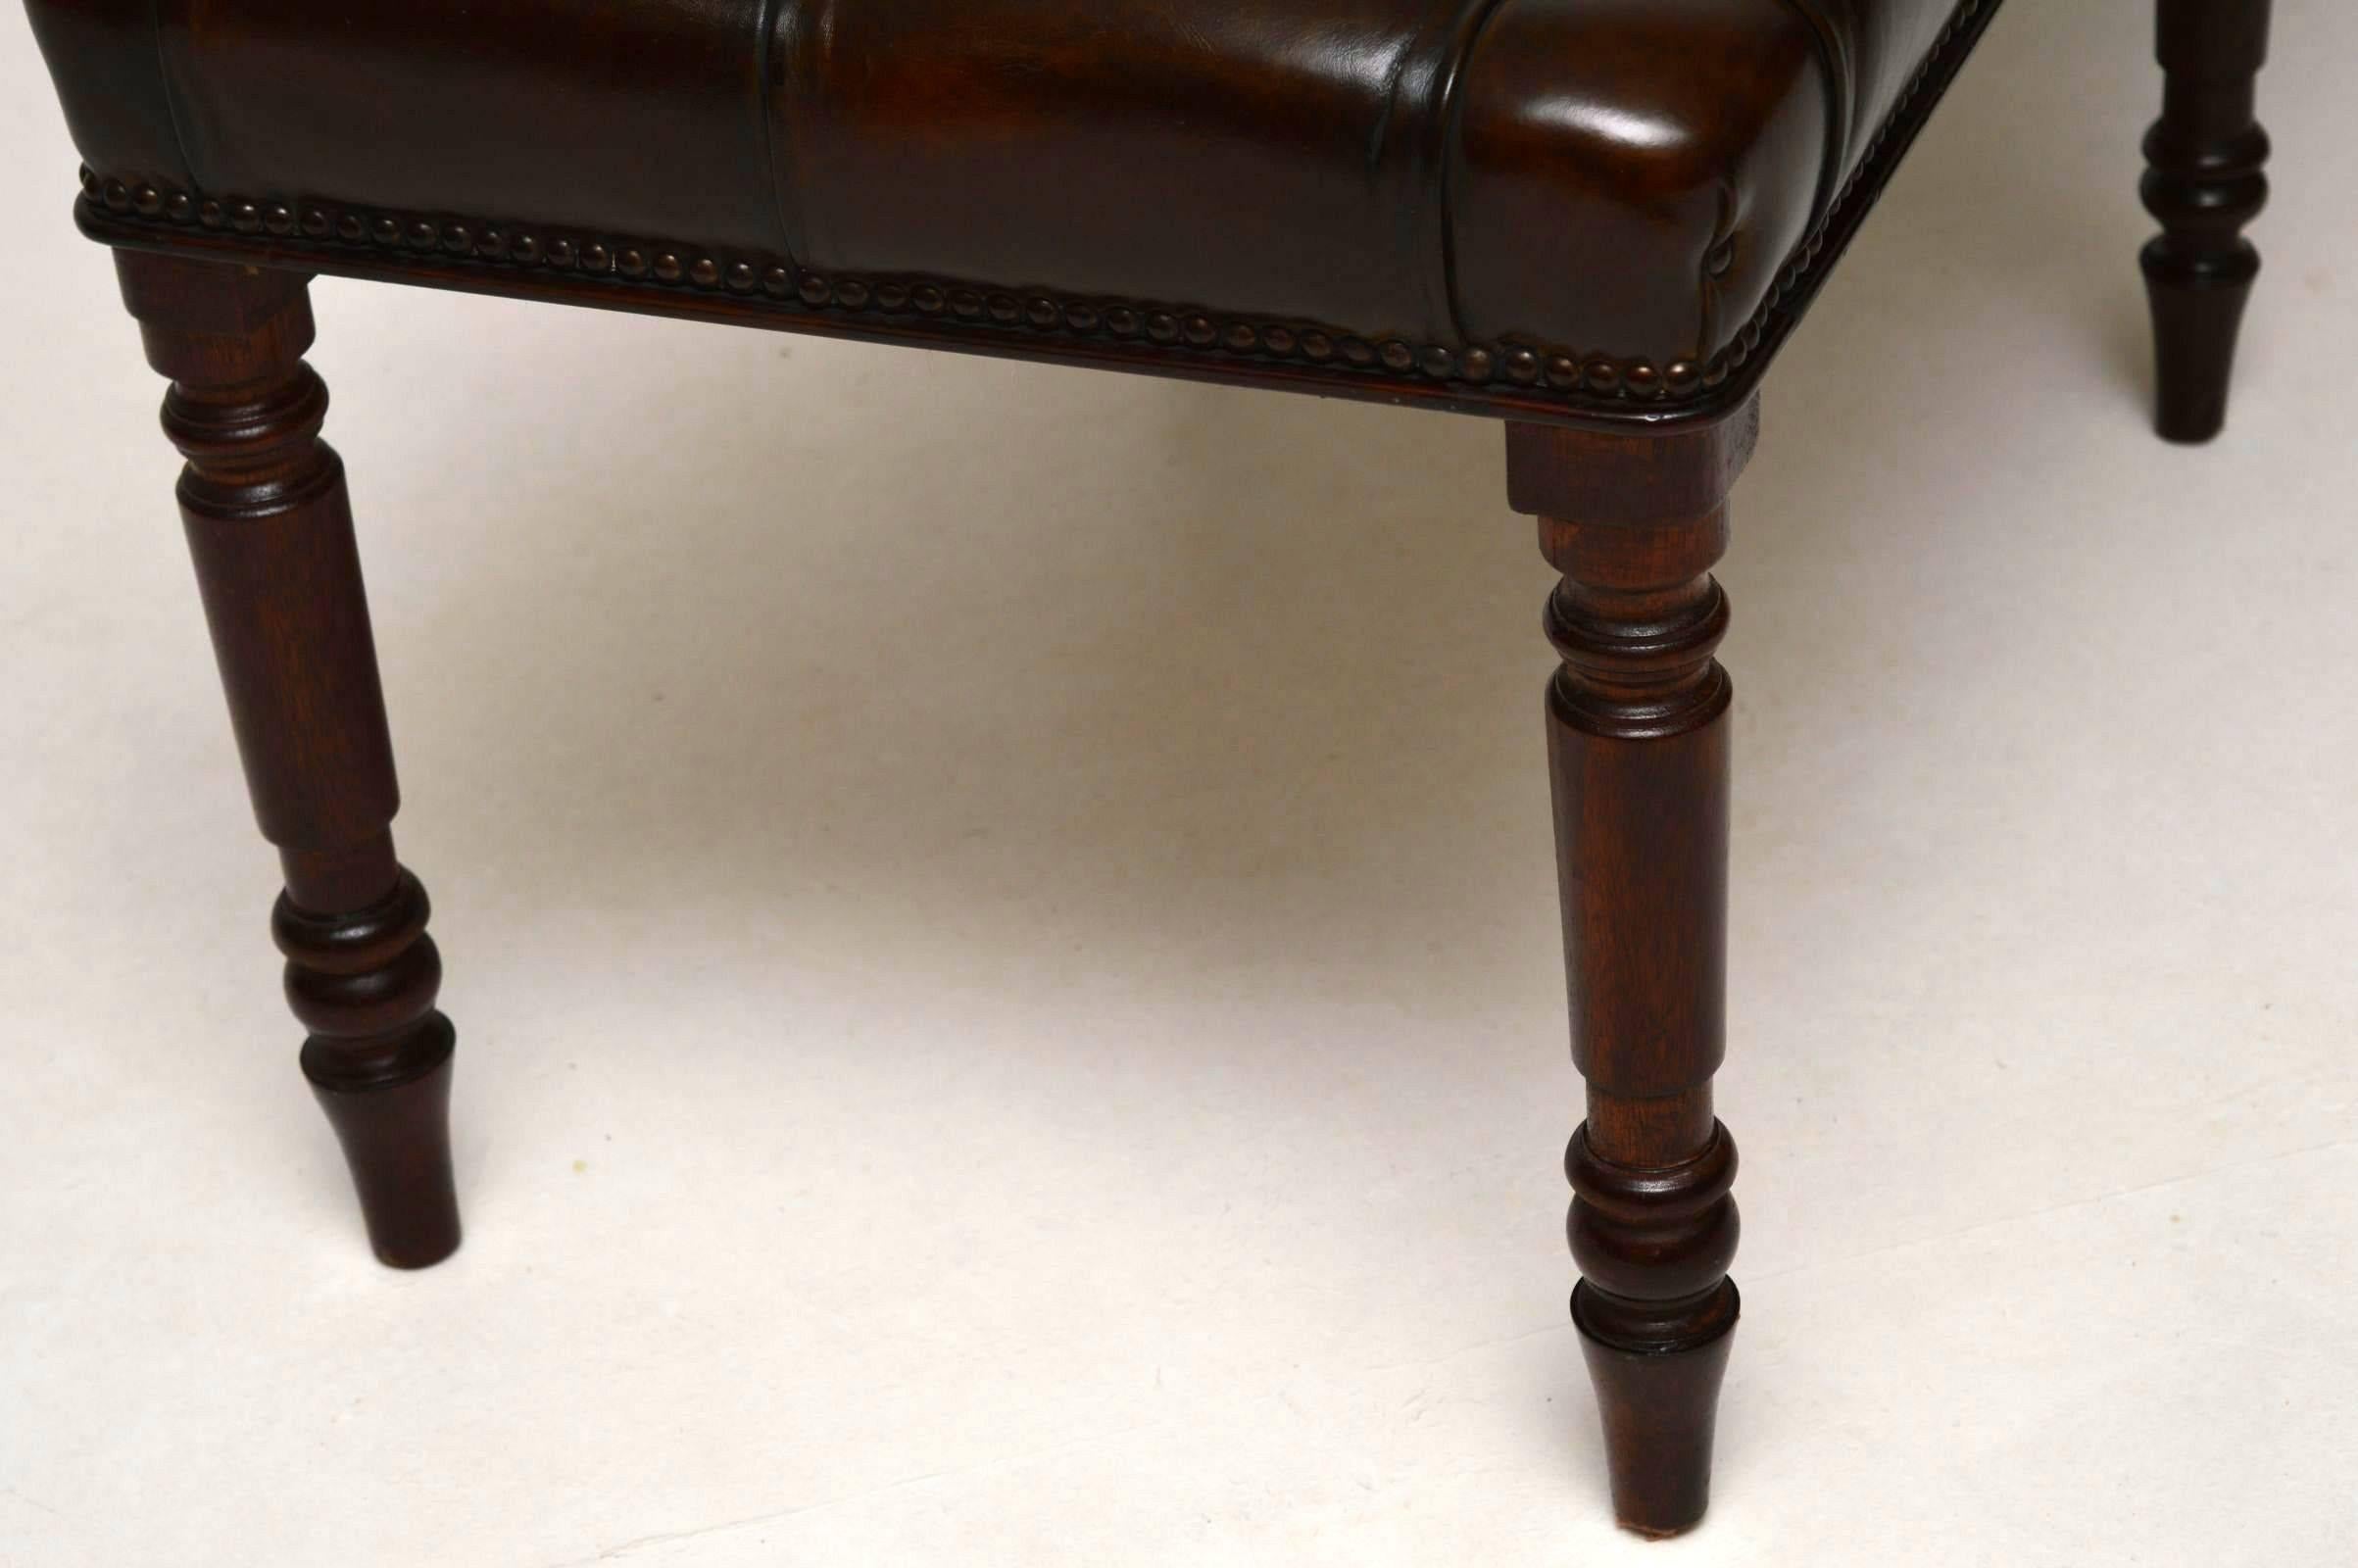 English Antique Deep Buttoned Leather Stool on Mahogany Legs